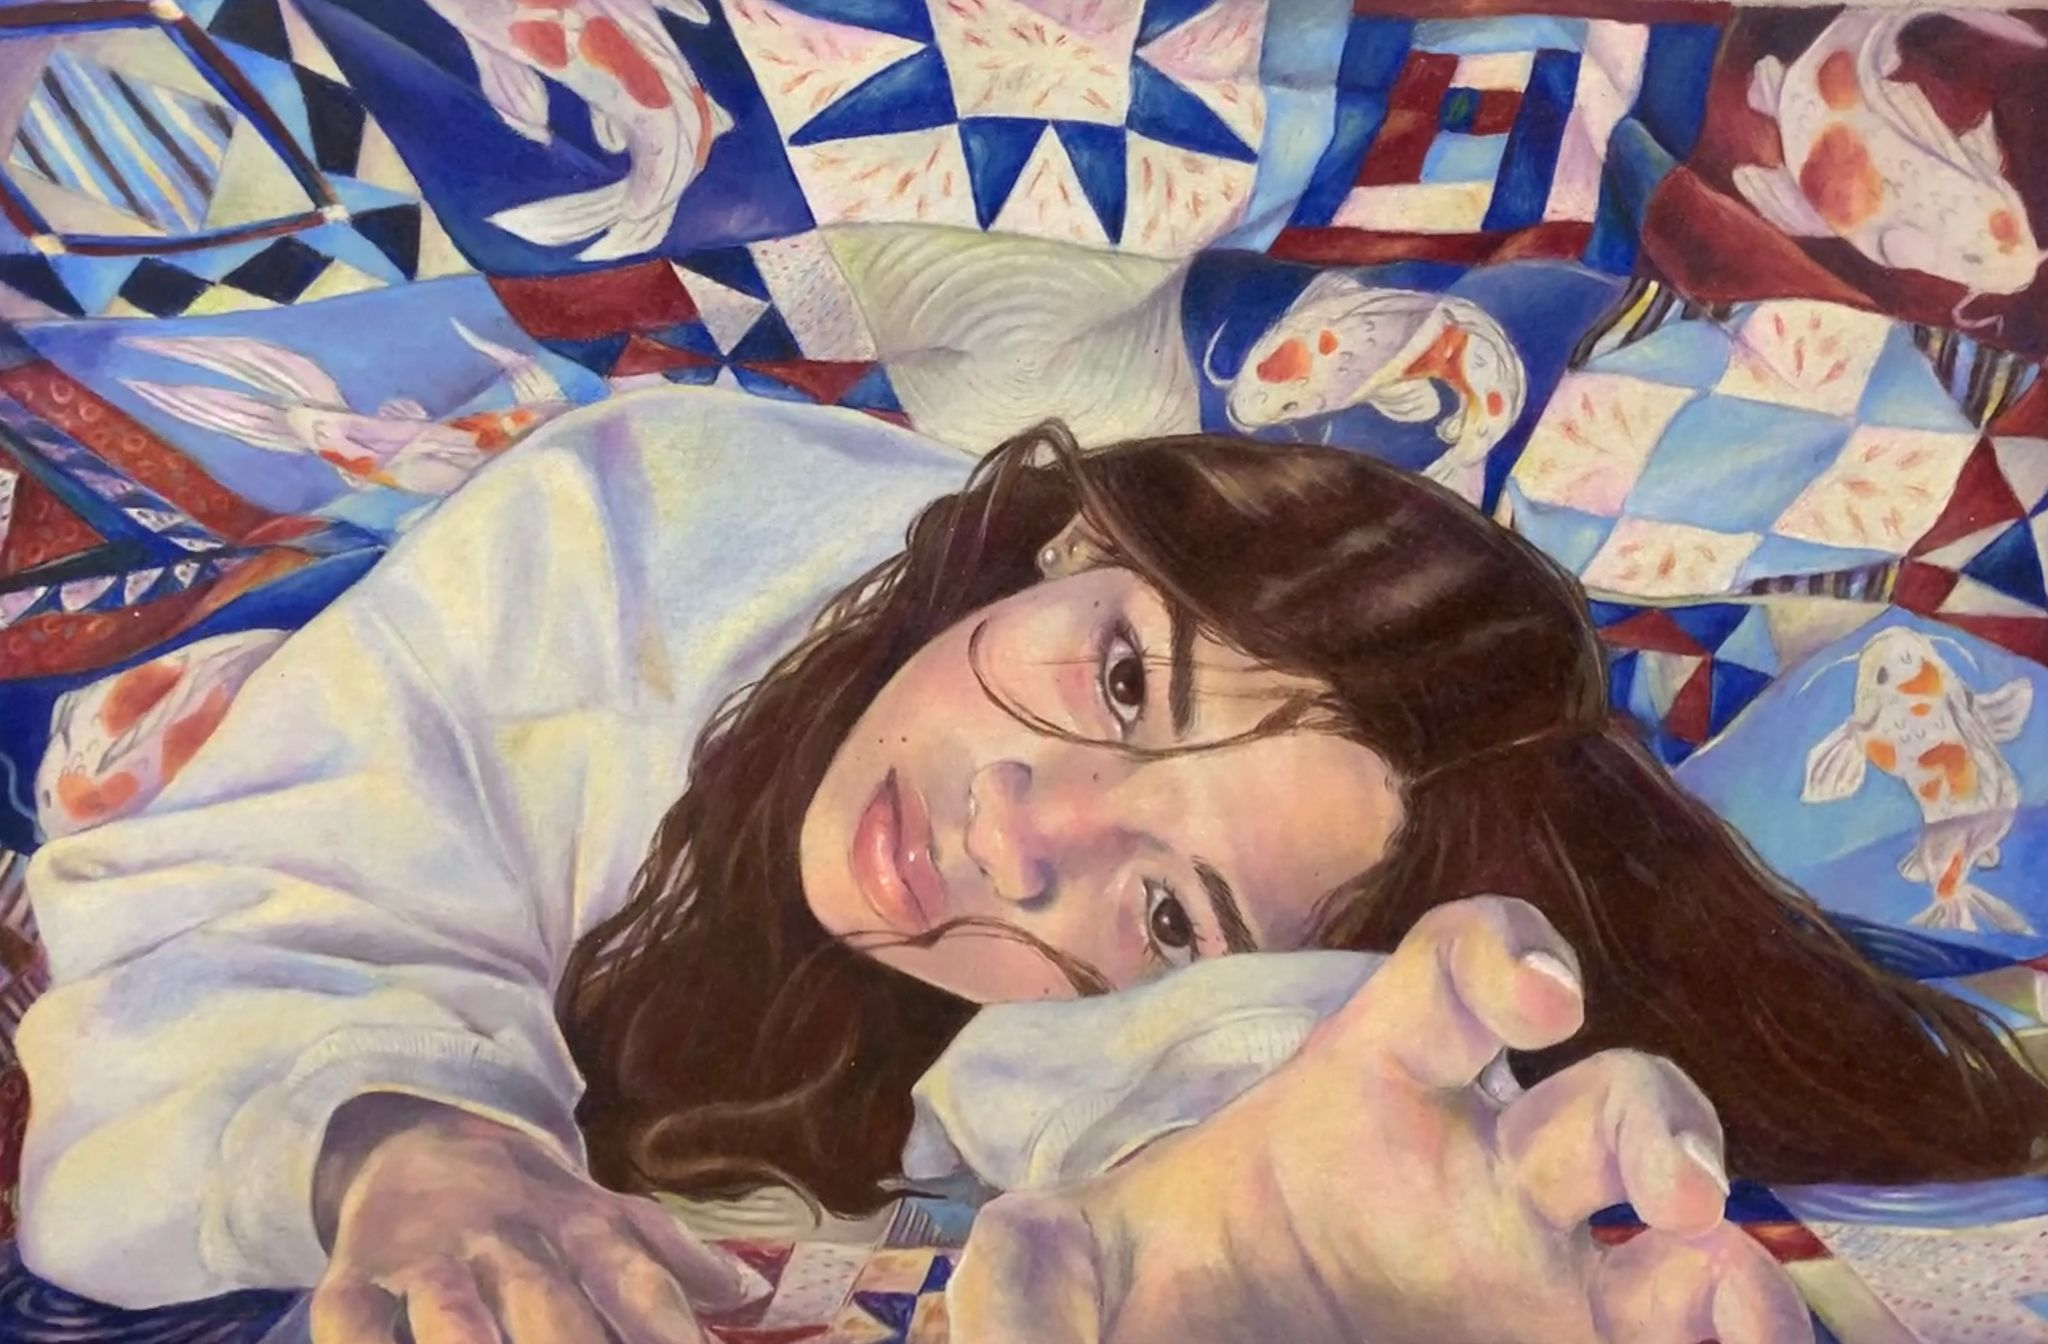 Rep. Raskin's 2023 Art Competition winning entry depicts a young girl with brown hair lying on her stomach reaching her hand toward the viewer. Above her the sky is a patterned quilt with fish. 